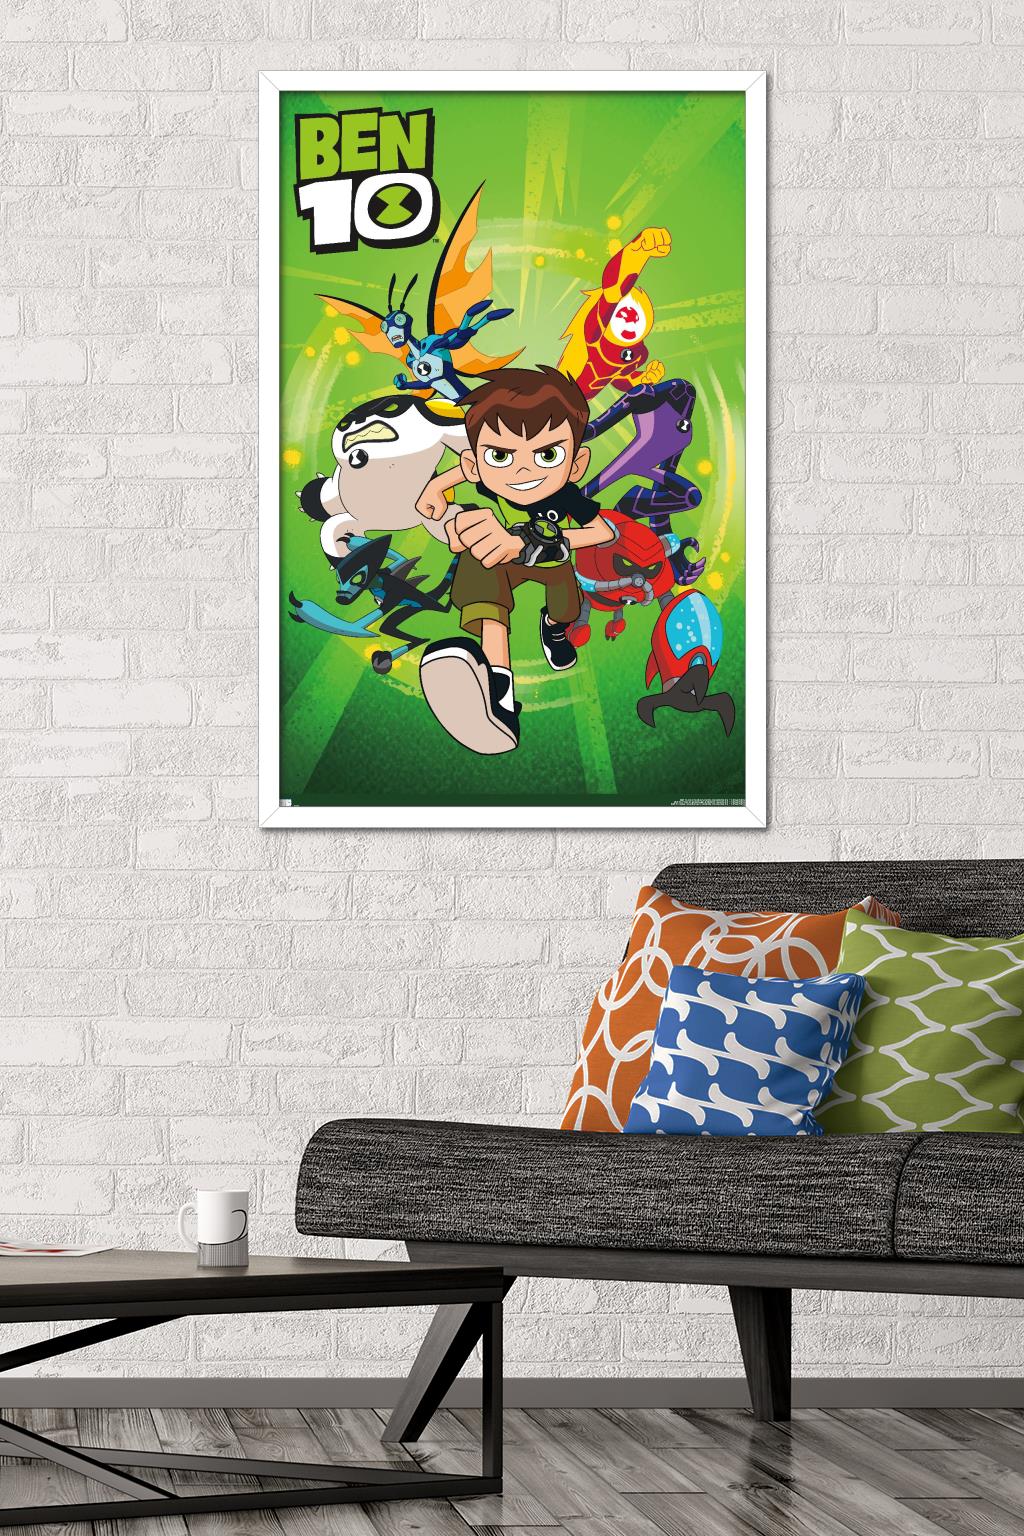 Ben 10 - Group Wall Poster, 22.375" x 34", Framed - image 2 of 5